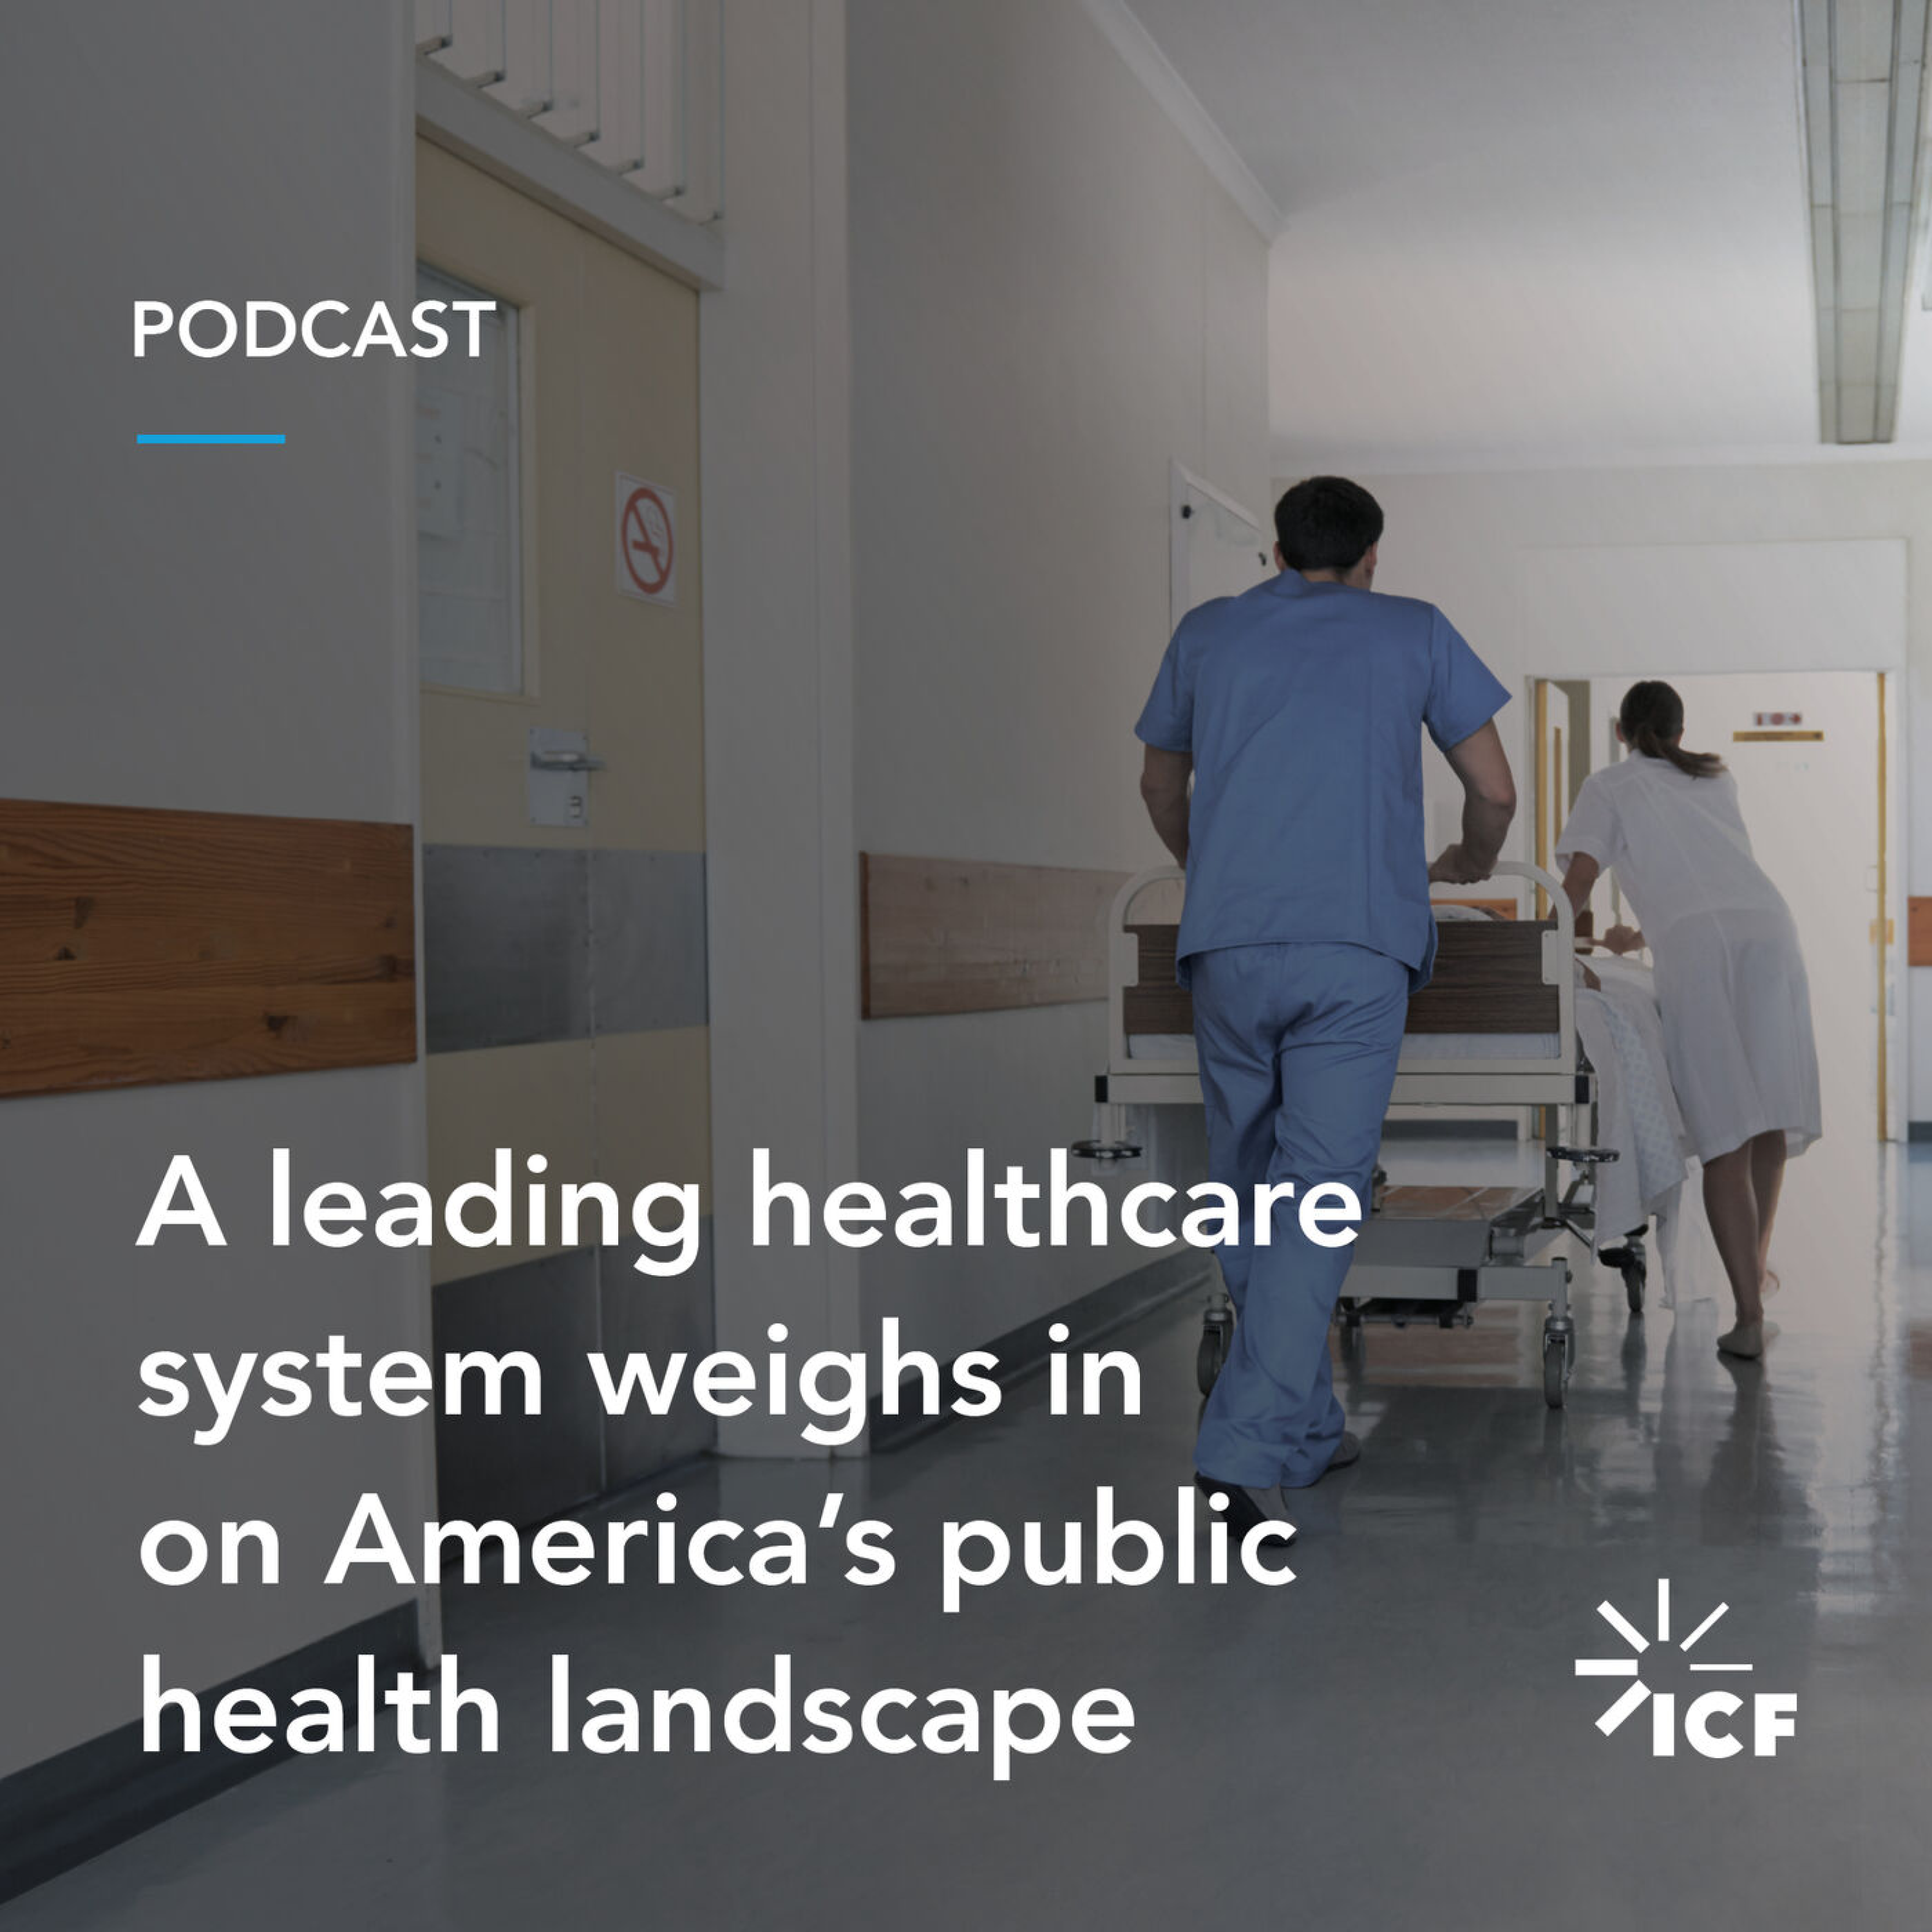 A leading healthcare system weighs in on America’s public health landscape